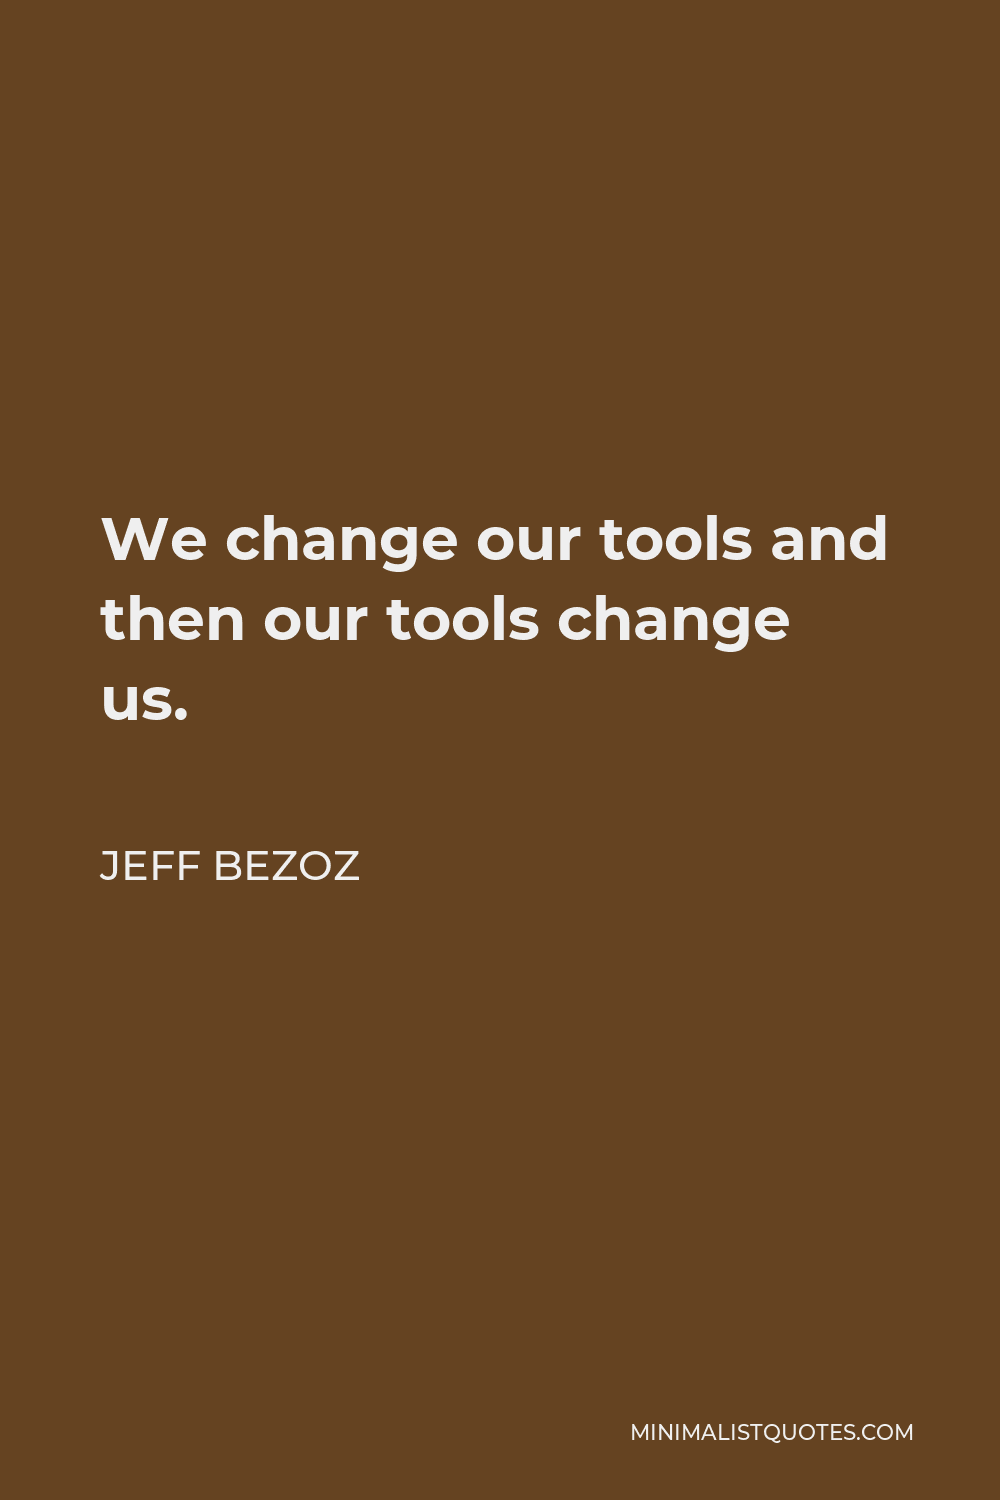 Jeff Bezoz Quote - We change our tools and then our tools change us.